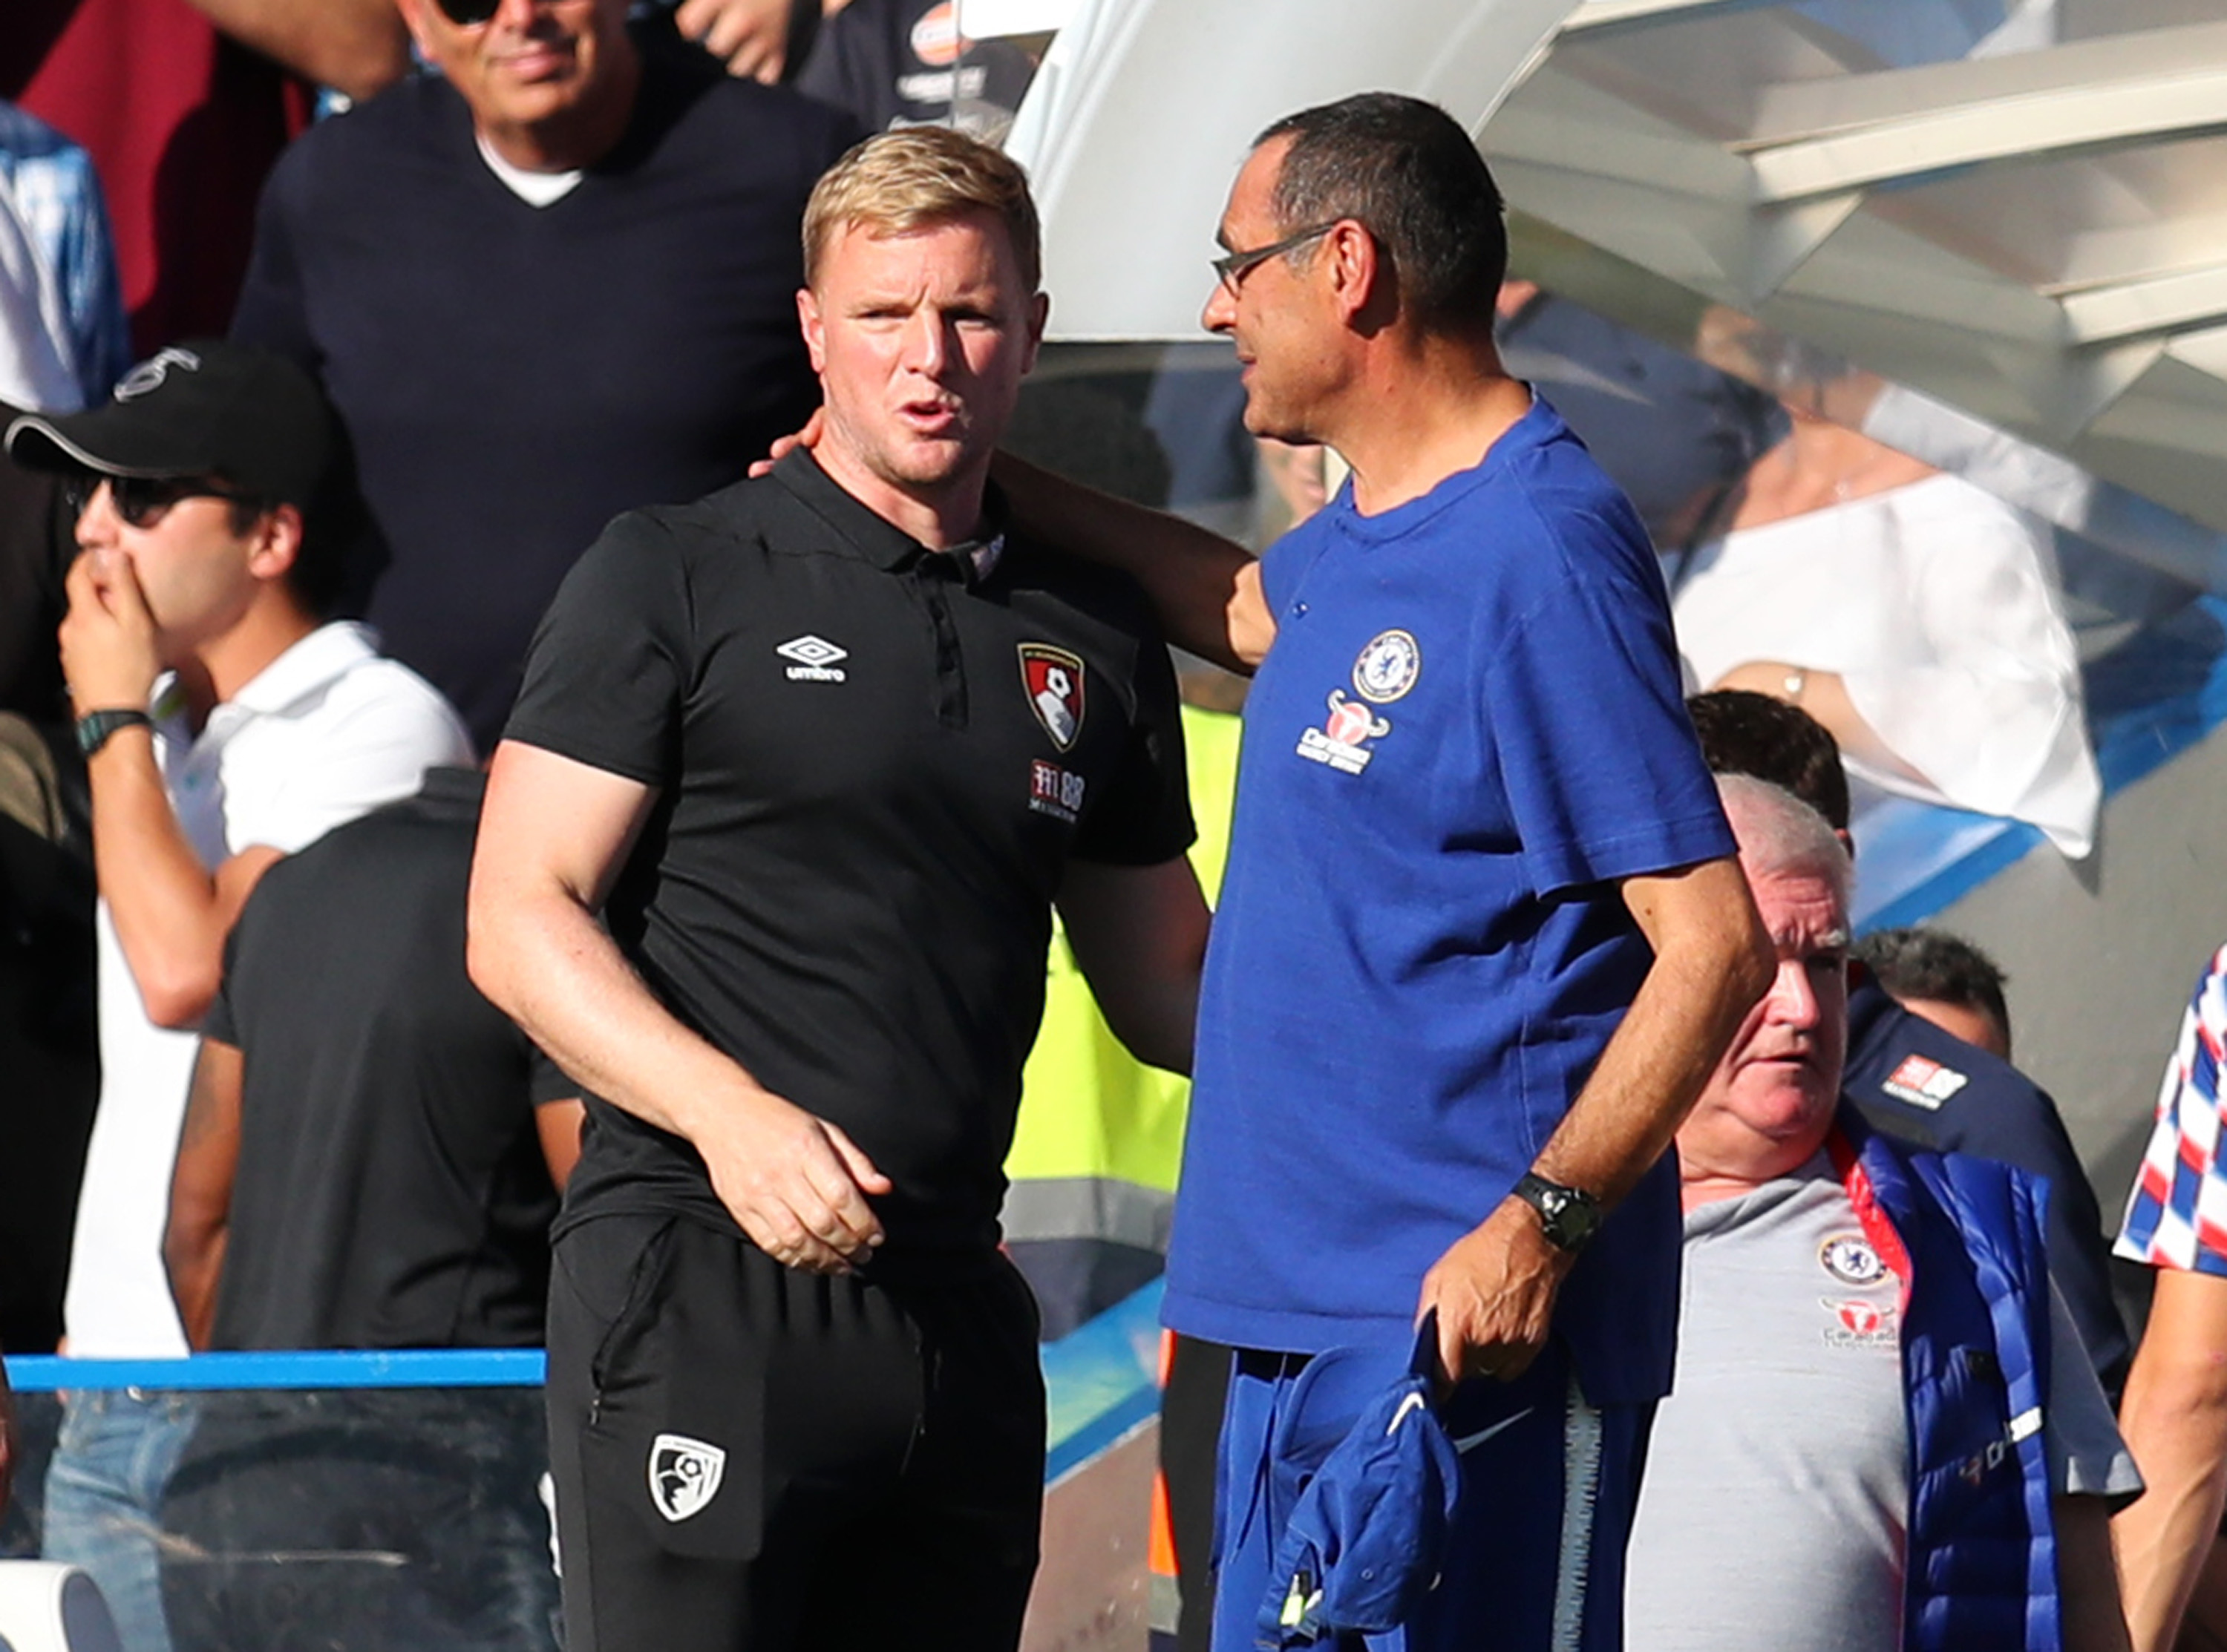 LONDON, ENGLAND - SEPTEMBER 01:  Eddie Howe, Manager of AFC Bournemouth and Maurizio Sarri, Manager of Chelsea speak following the Premier League match between Chelsea FC and AFC Bournemouth at Stamford Bridge on September 1, 2018 in London, United Kingdom.  (Photo by Catherine Ivill/Getty Images)